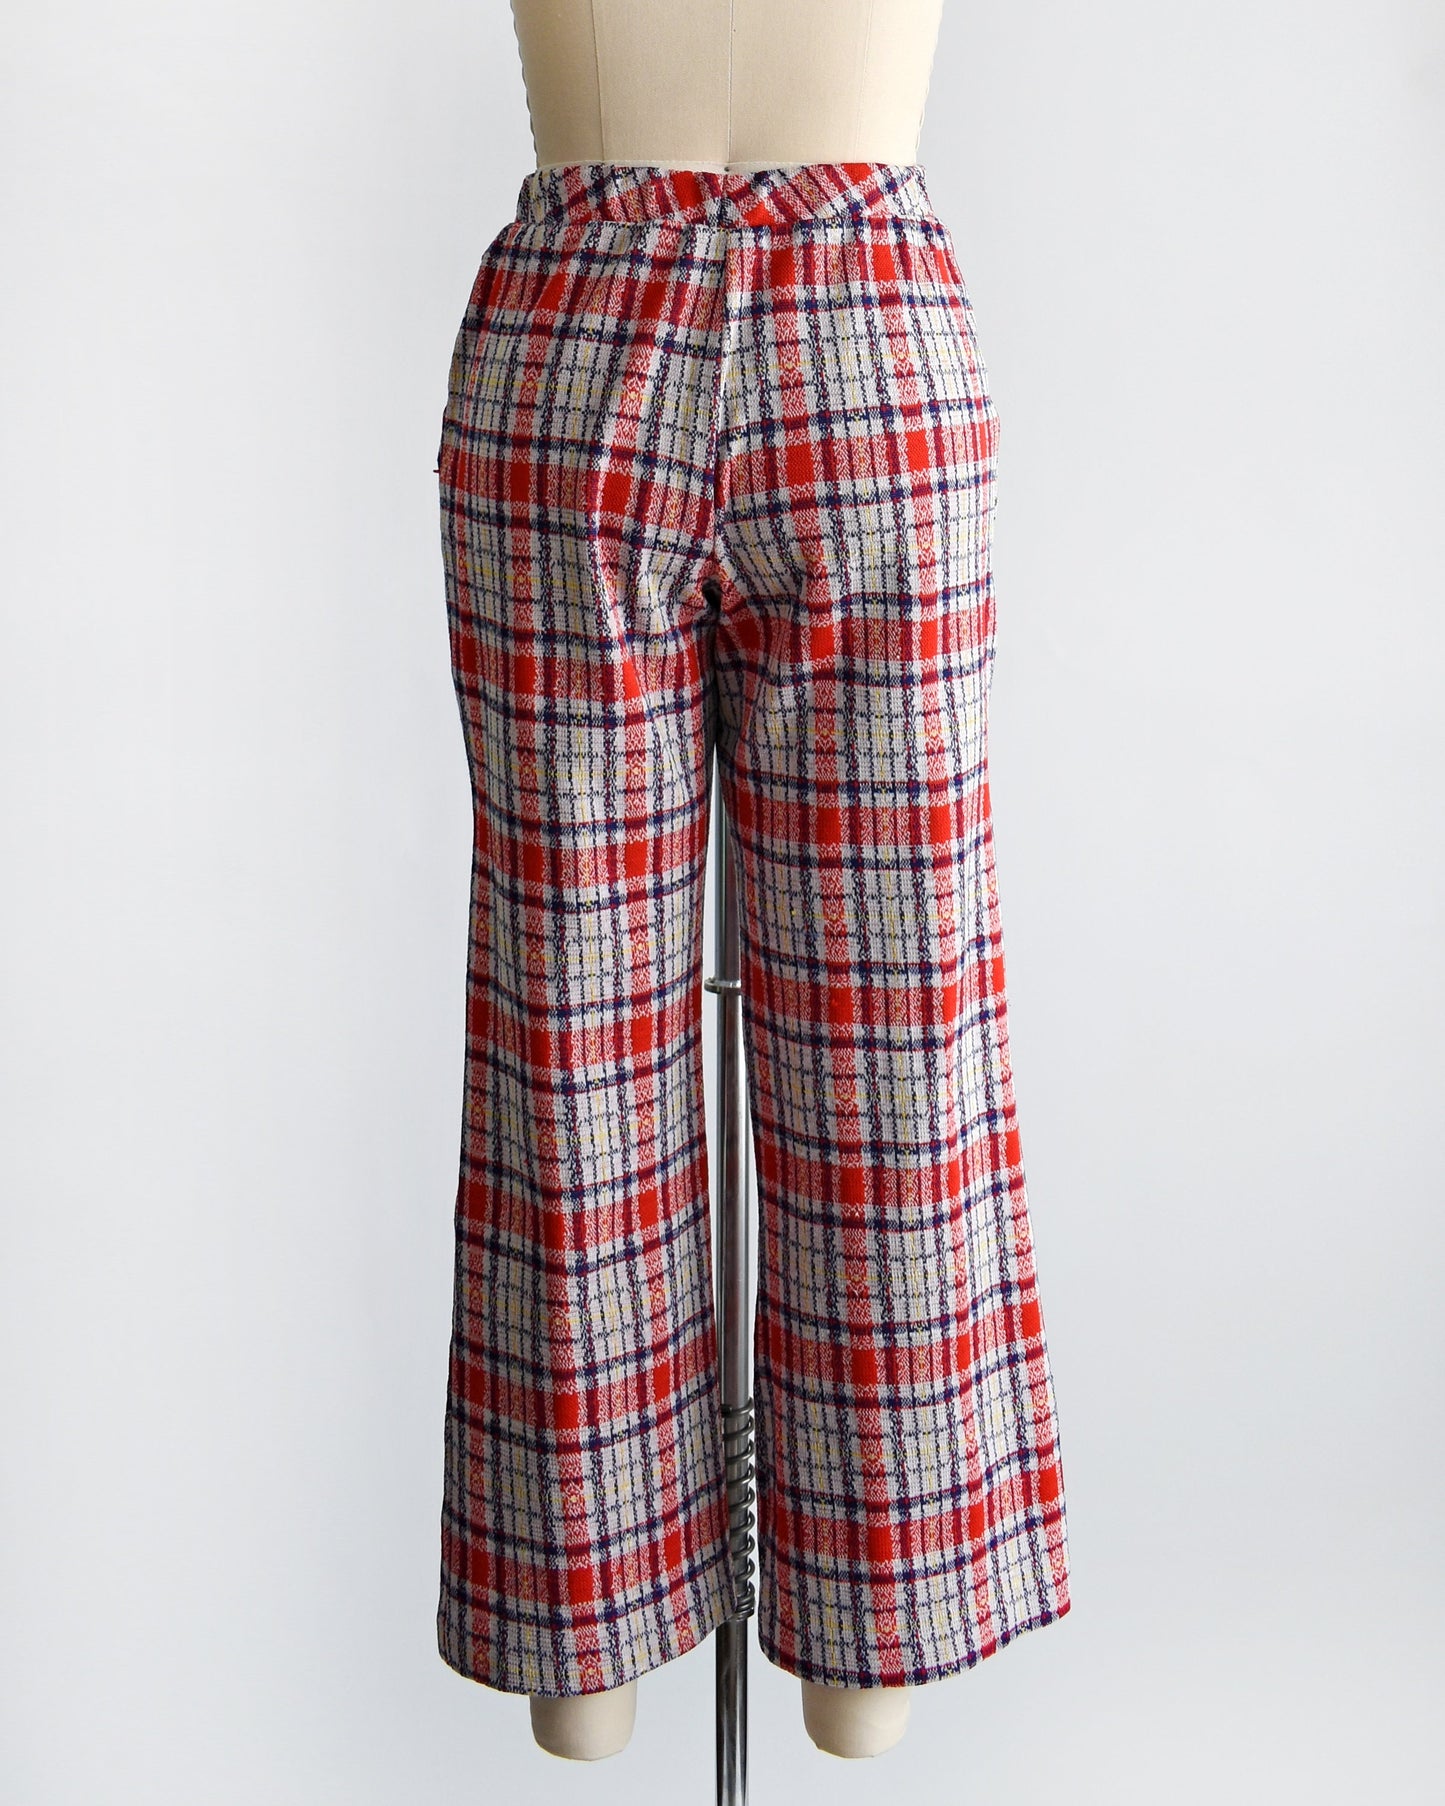 Back view of a vintage pair of 70s red white and blue plaid wide leg pants on a dress form.